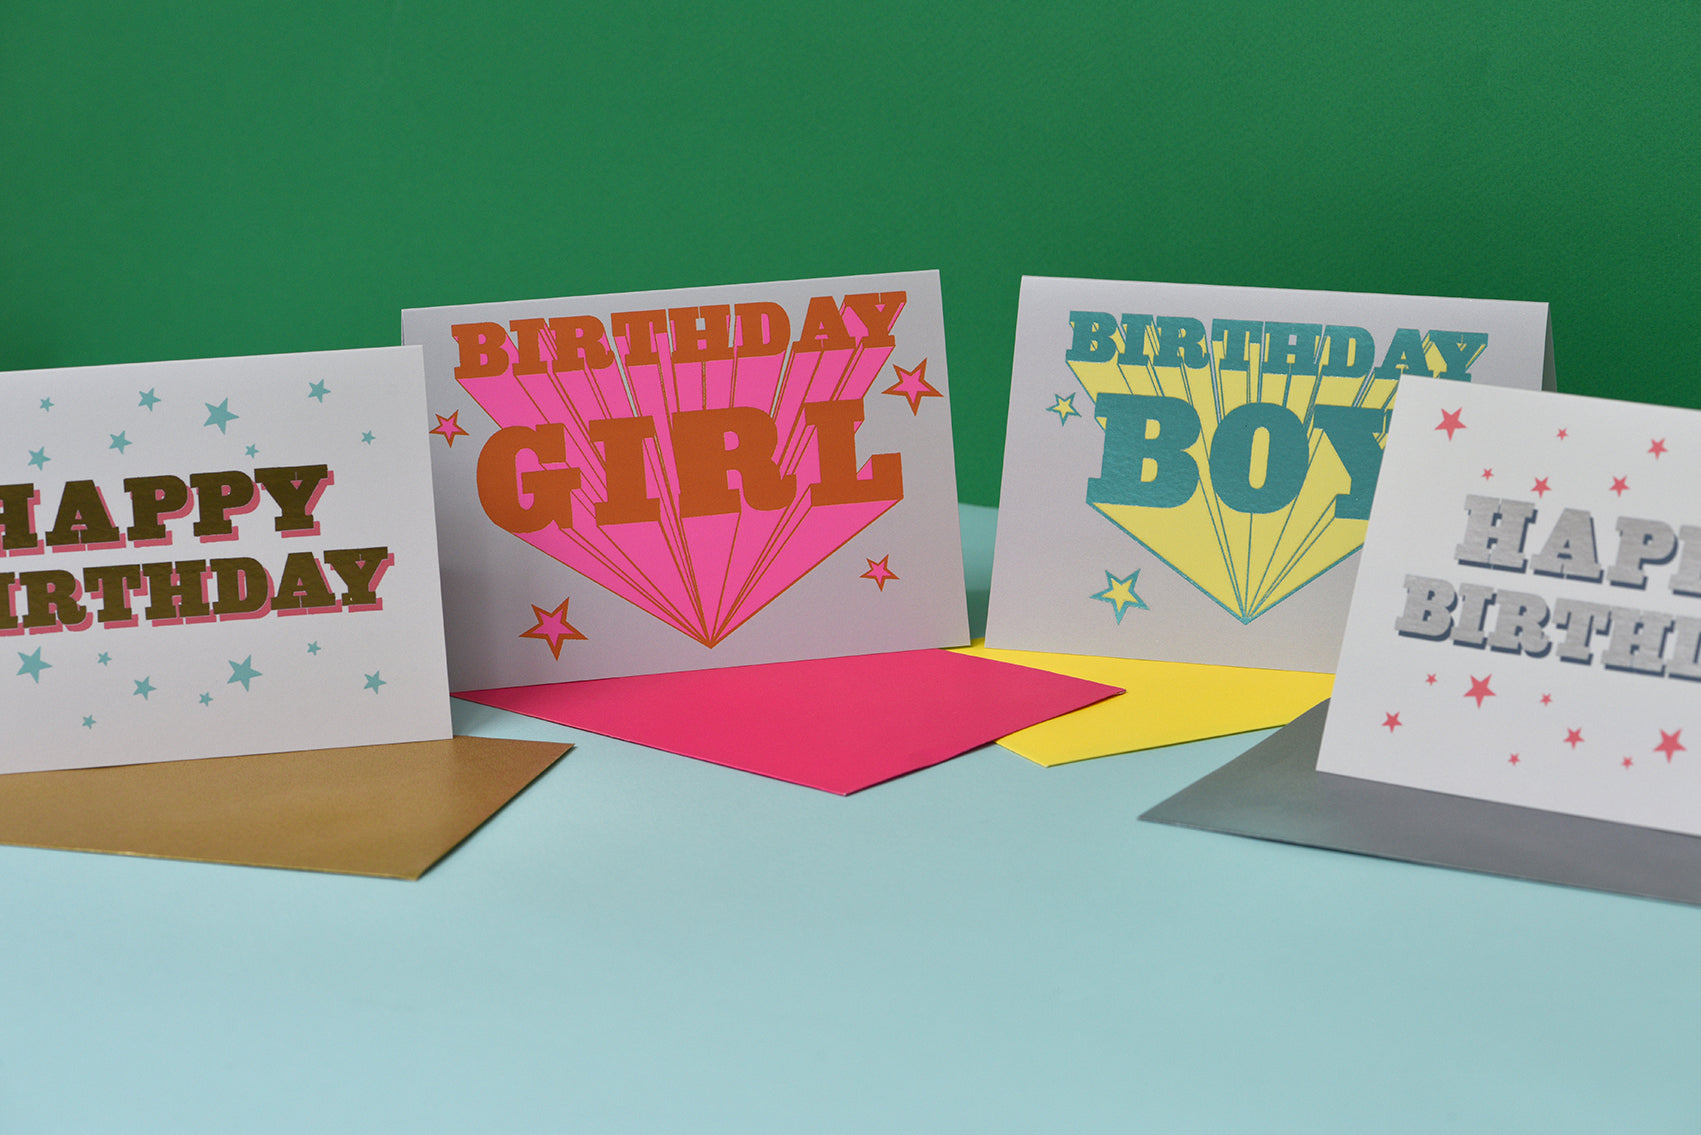 Happy birthday cards selection